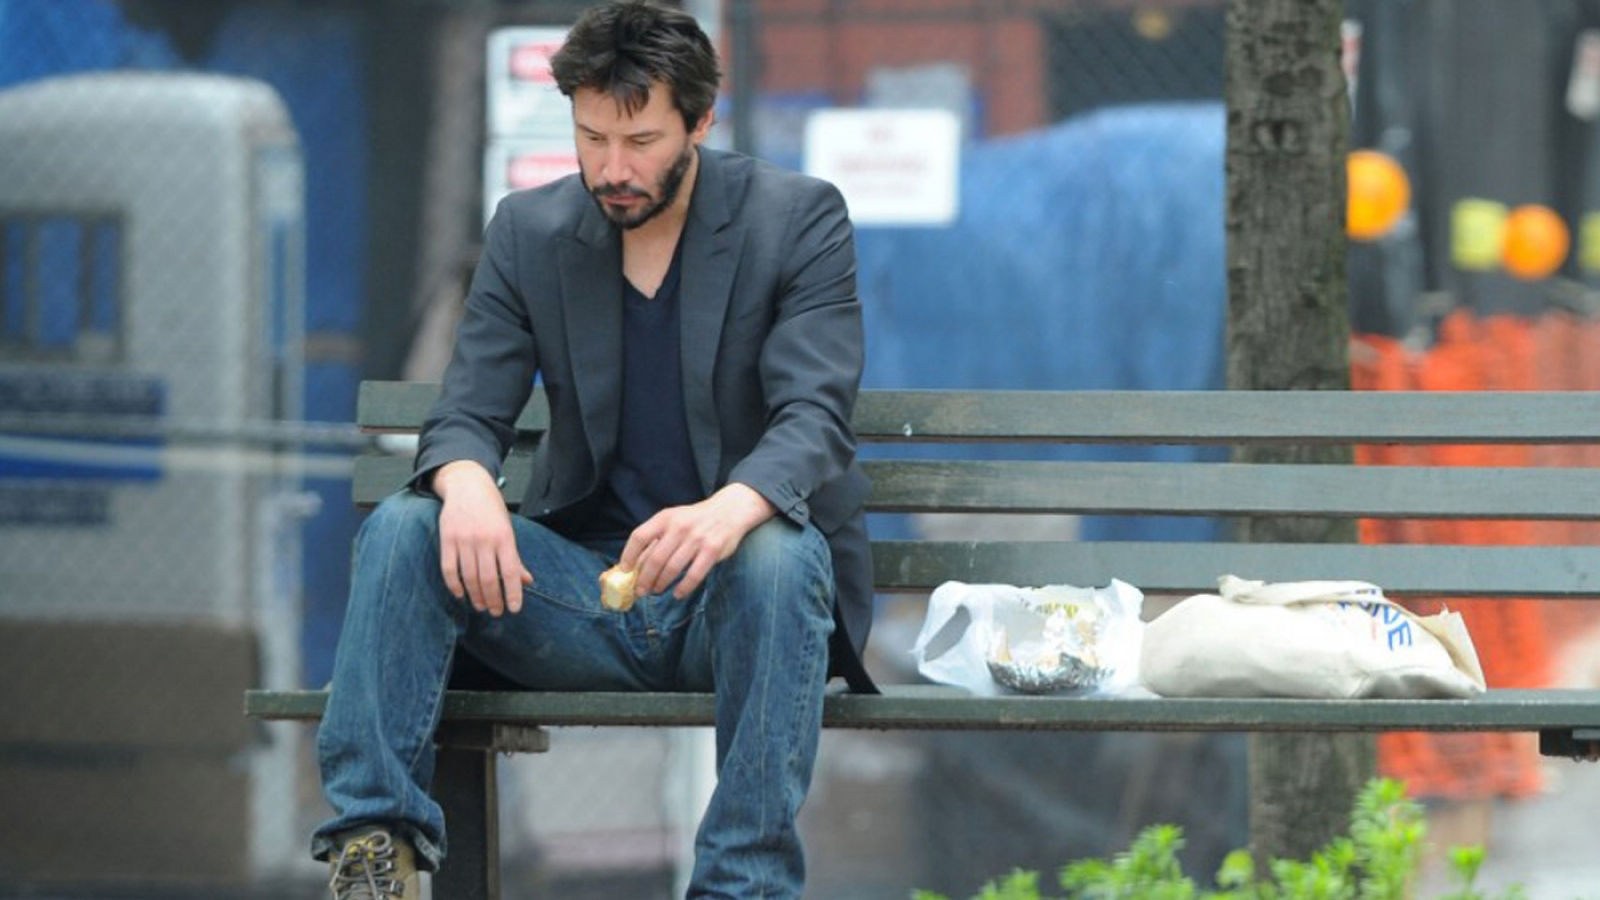 Keanu Reeves had his daughter and girlfriend pass away within 18 months of each other